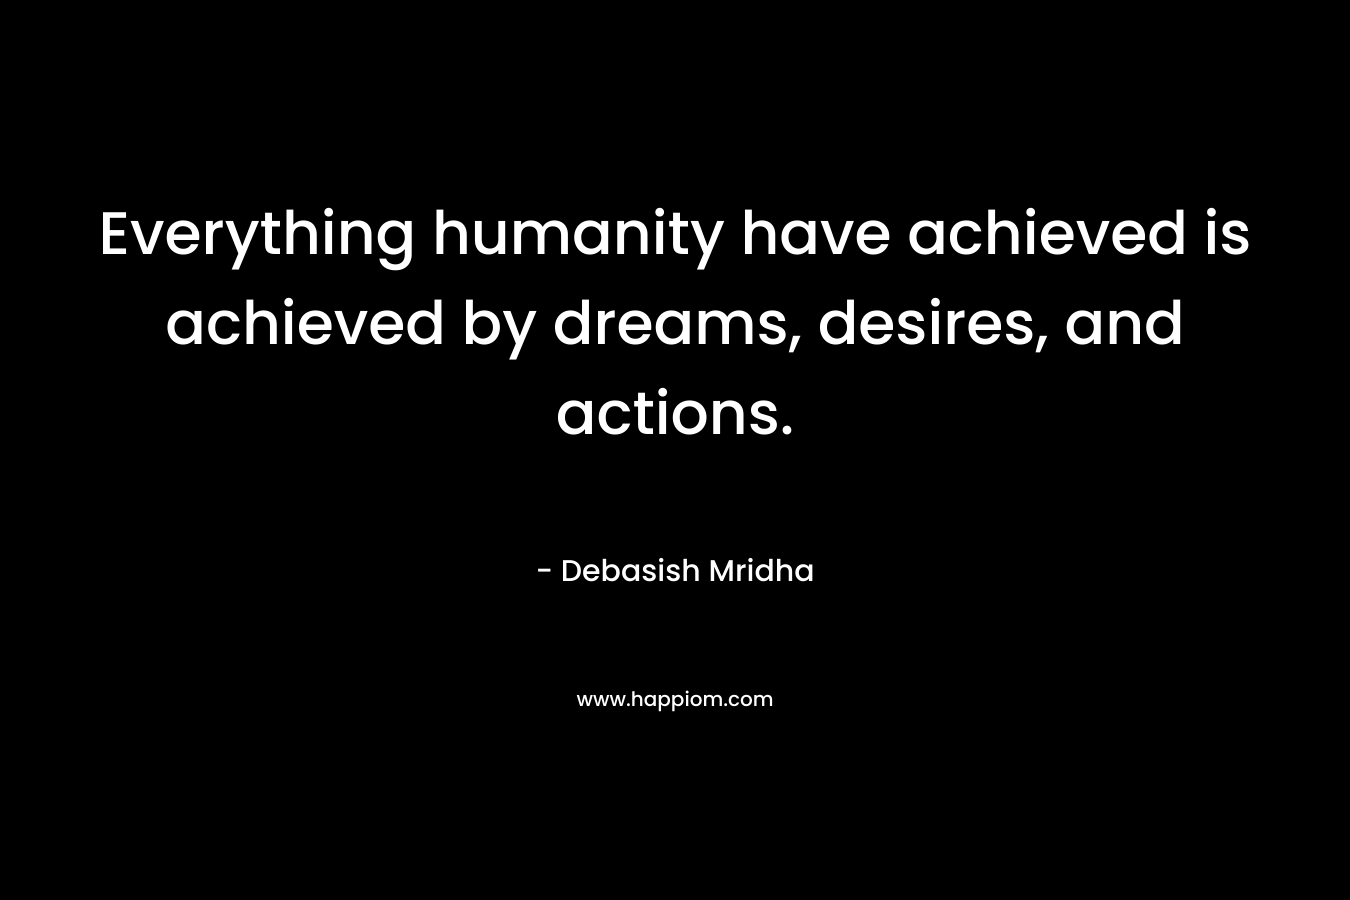 Everything humanity have achieved is achieved by dreams, desires, and actions.